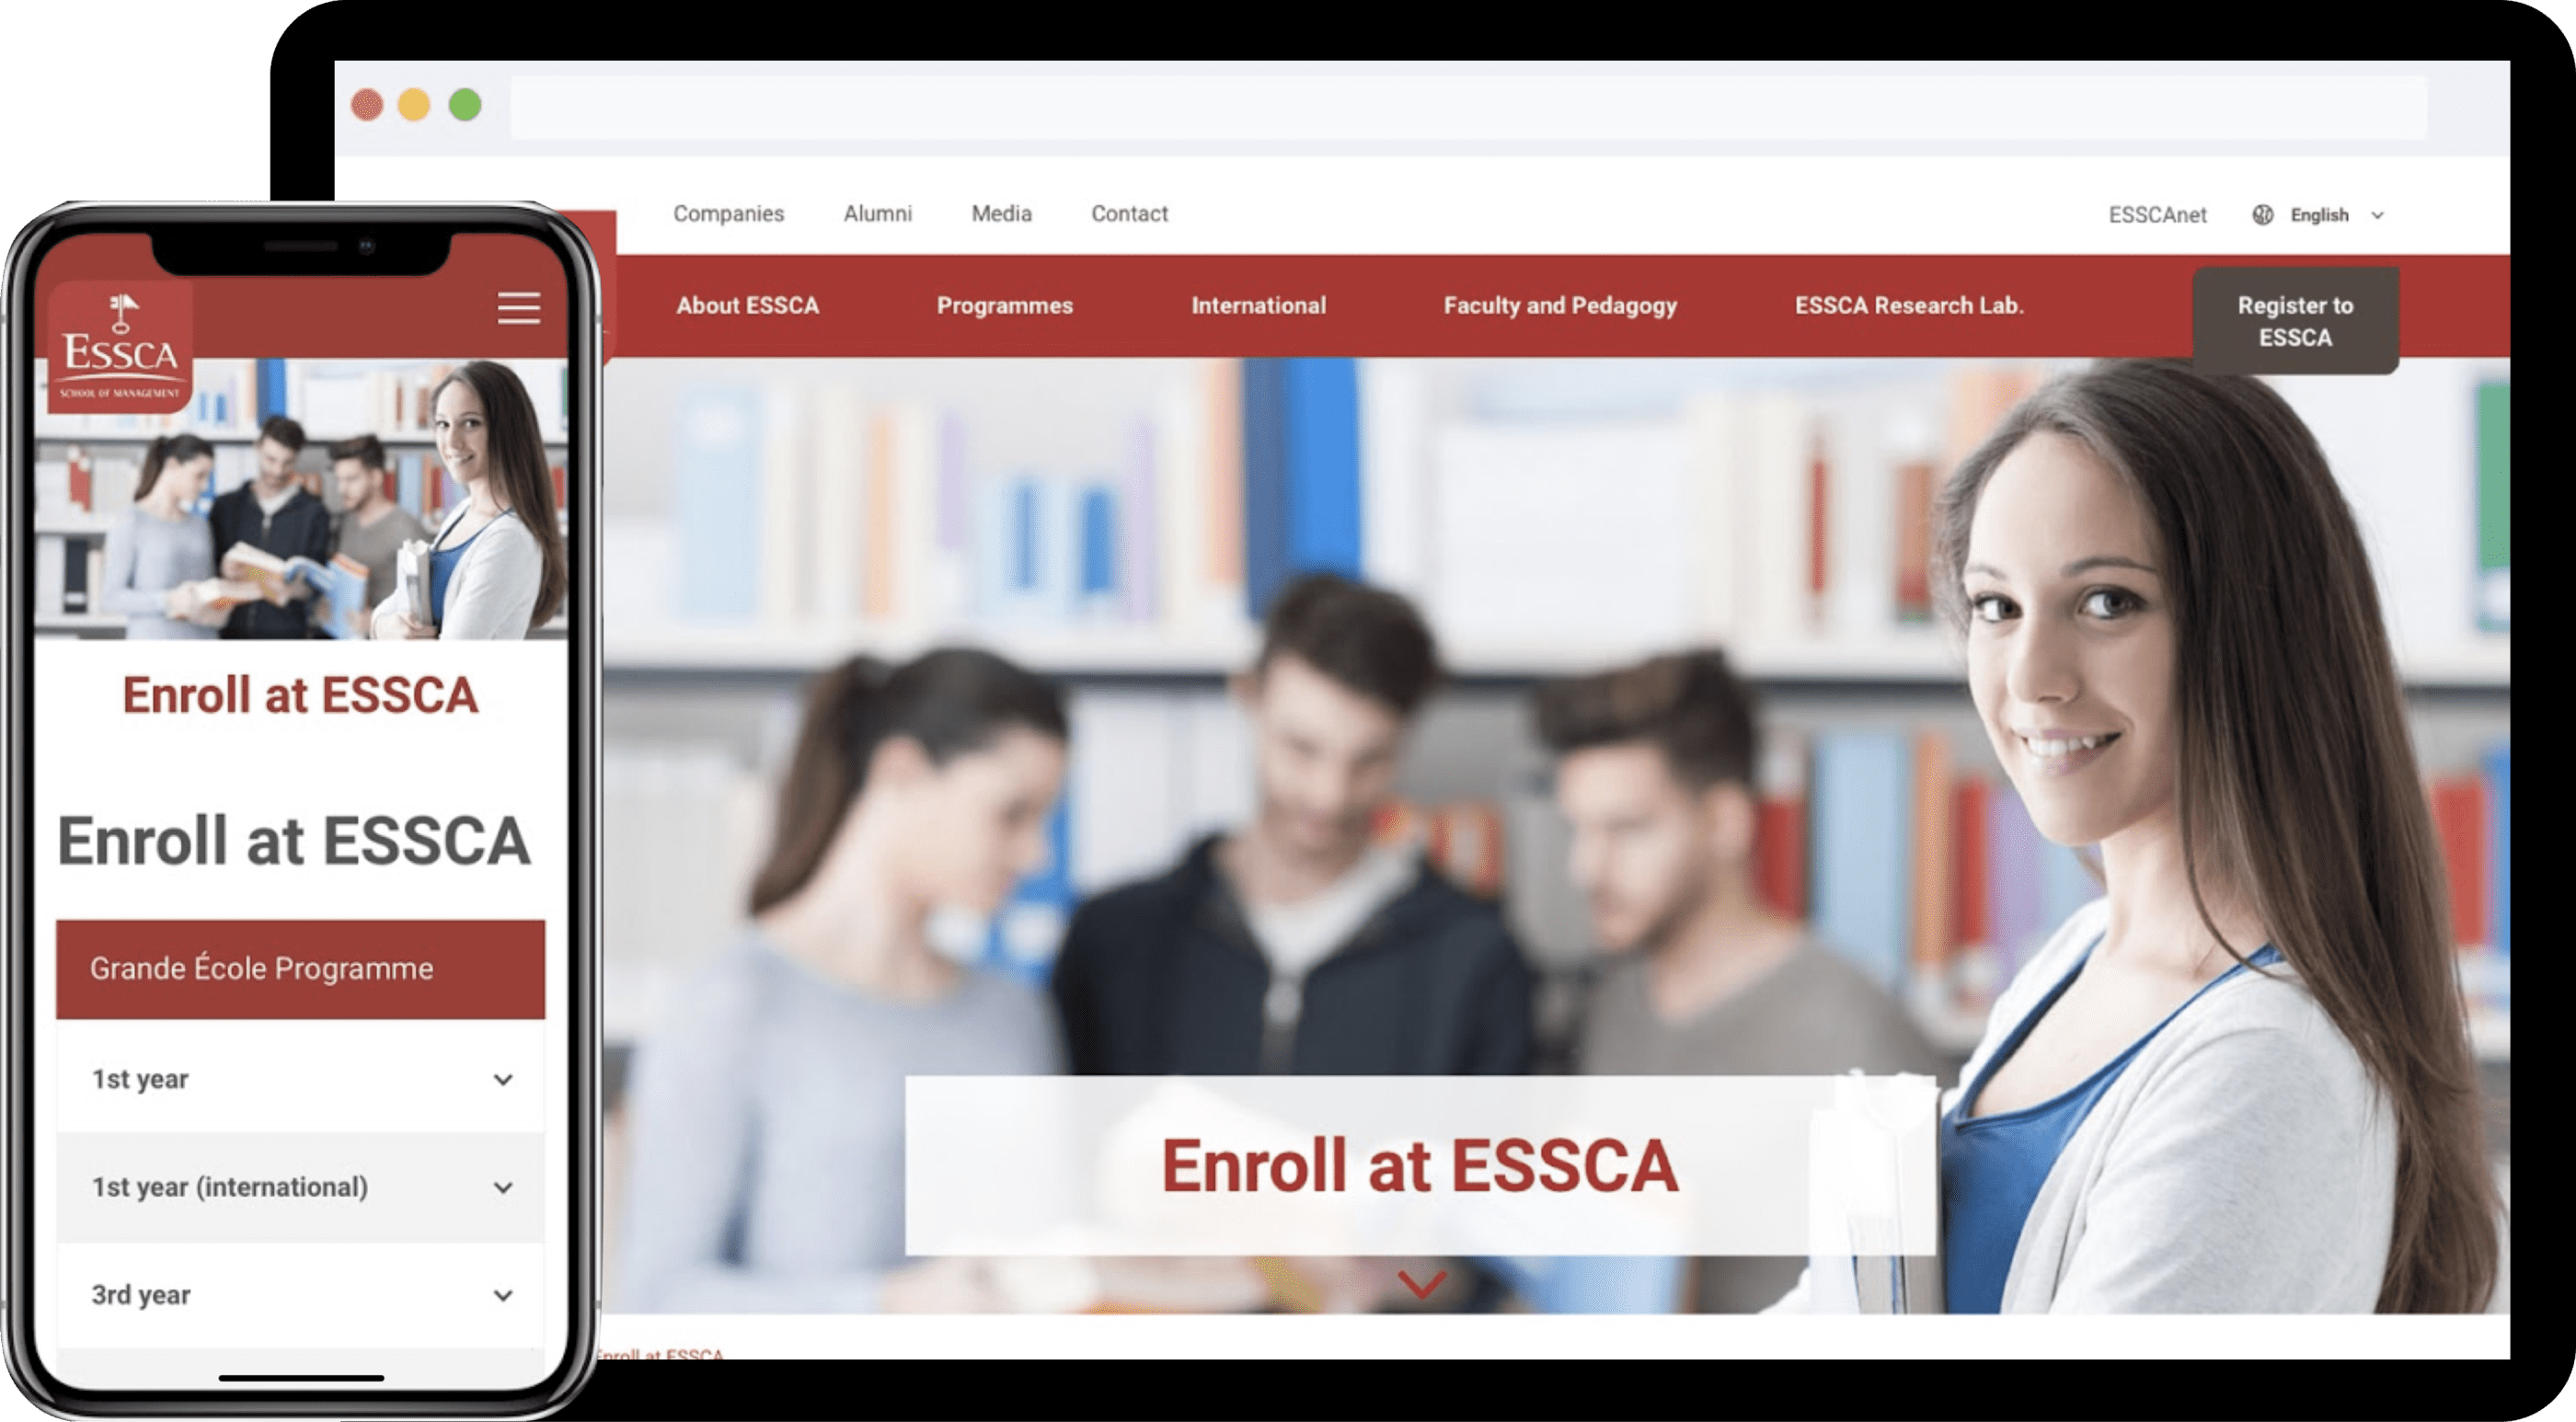 Desktop and mobile mockups of the redesigned ESSCA website that kept the initial color scheme - red and light brown